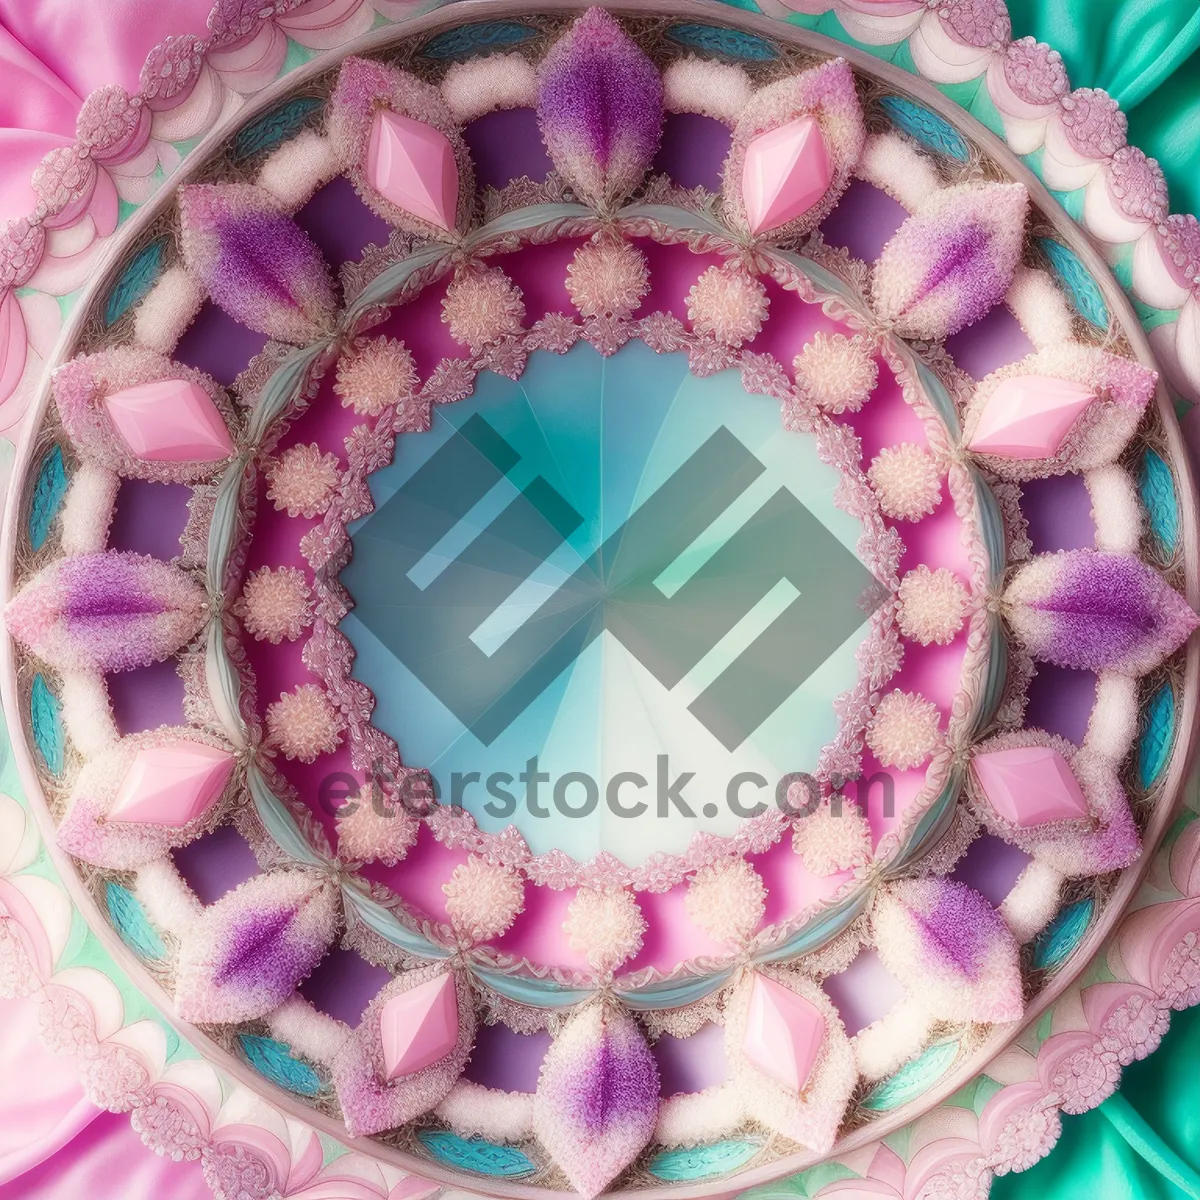 Picture of Vibrant Floral Kaleidoscope Design